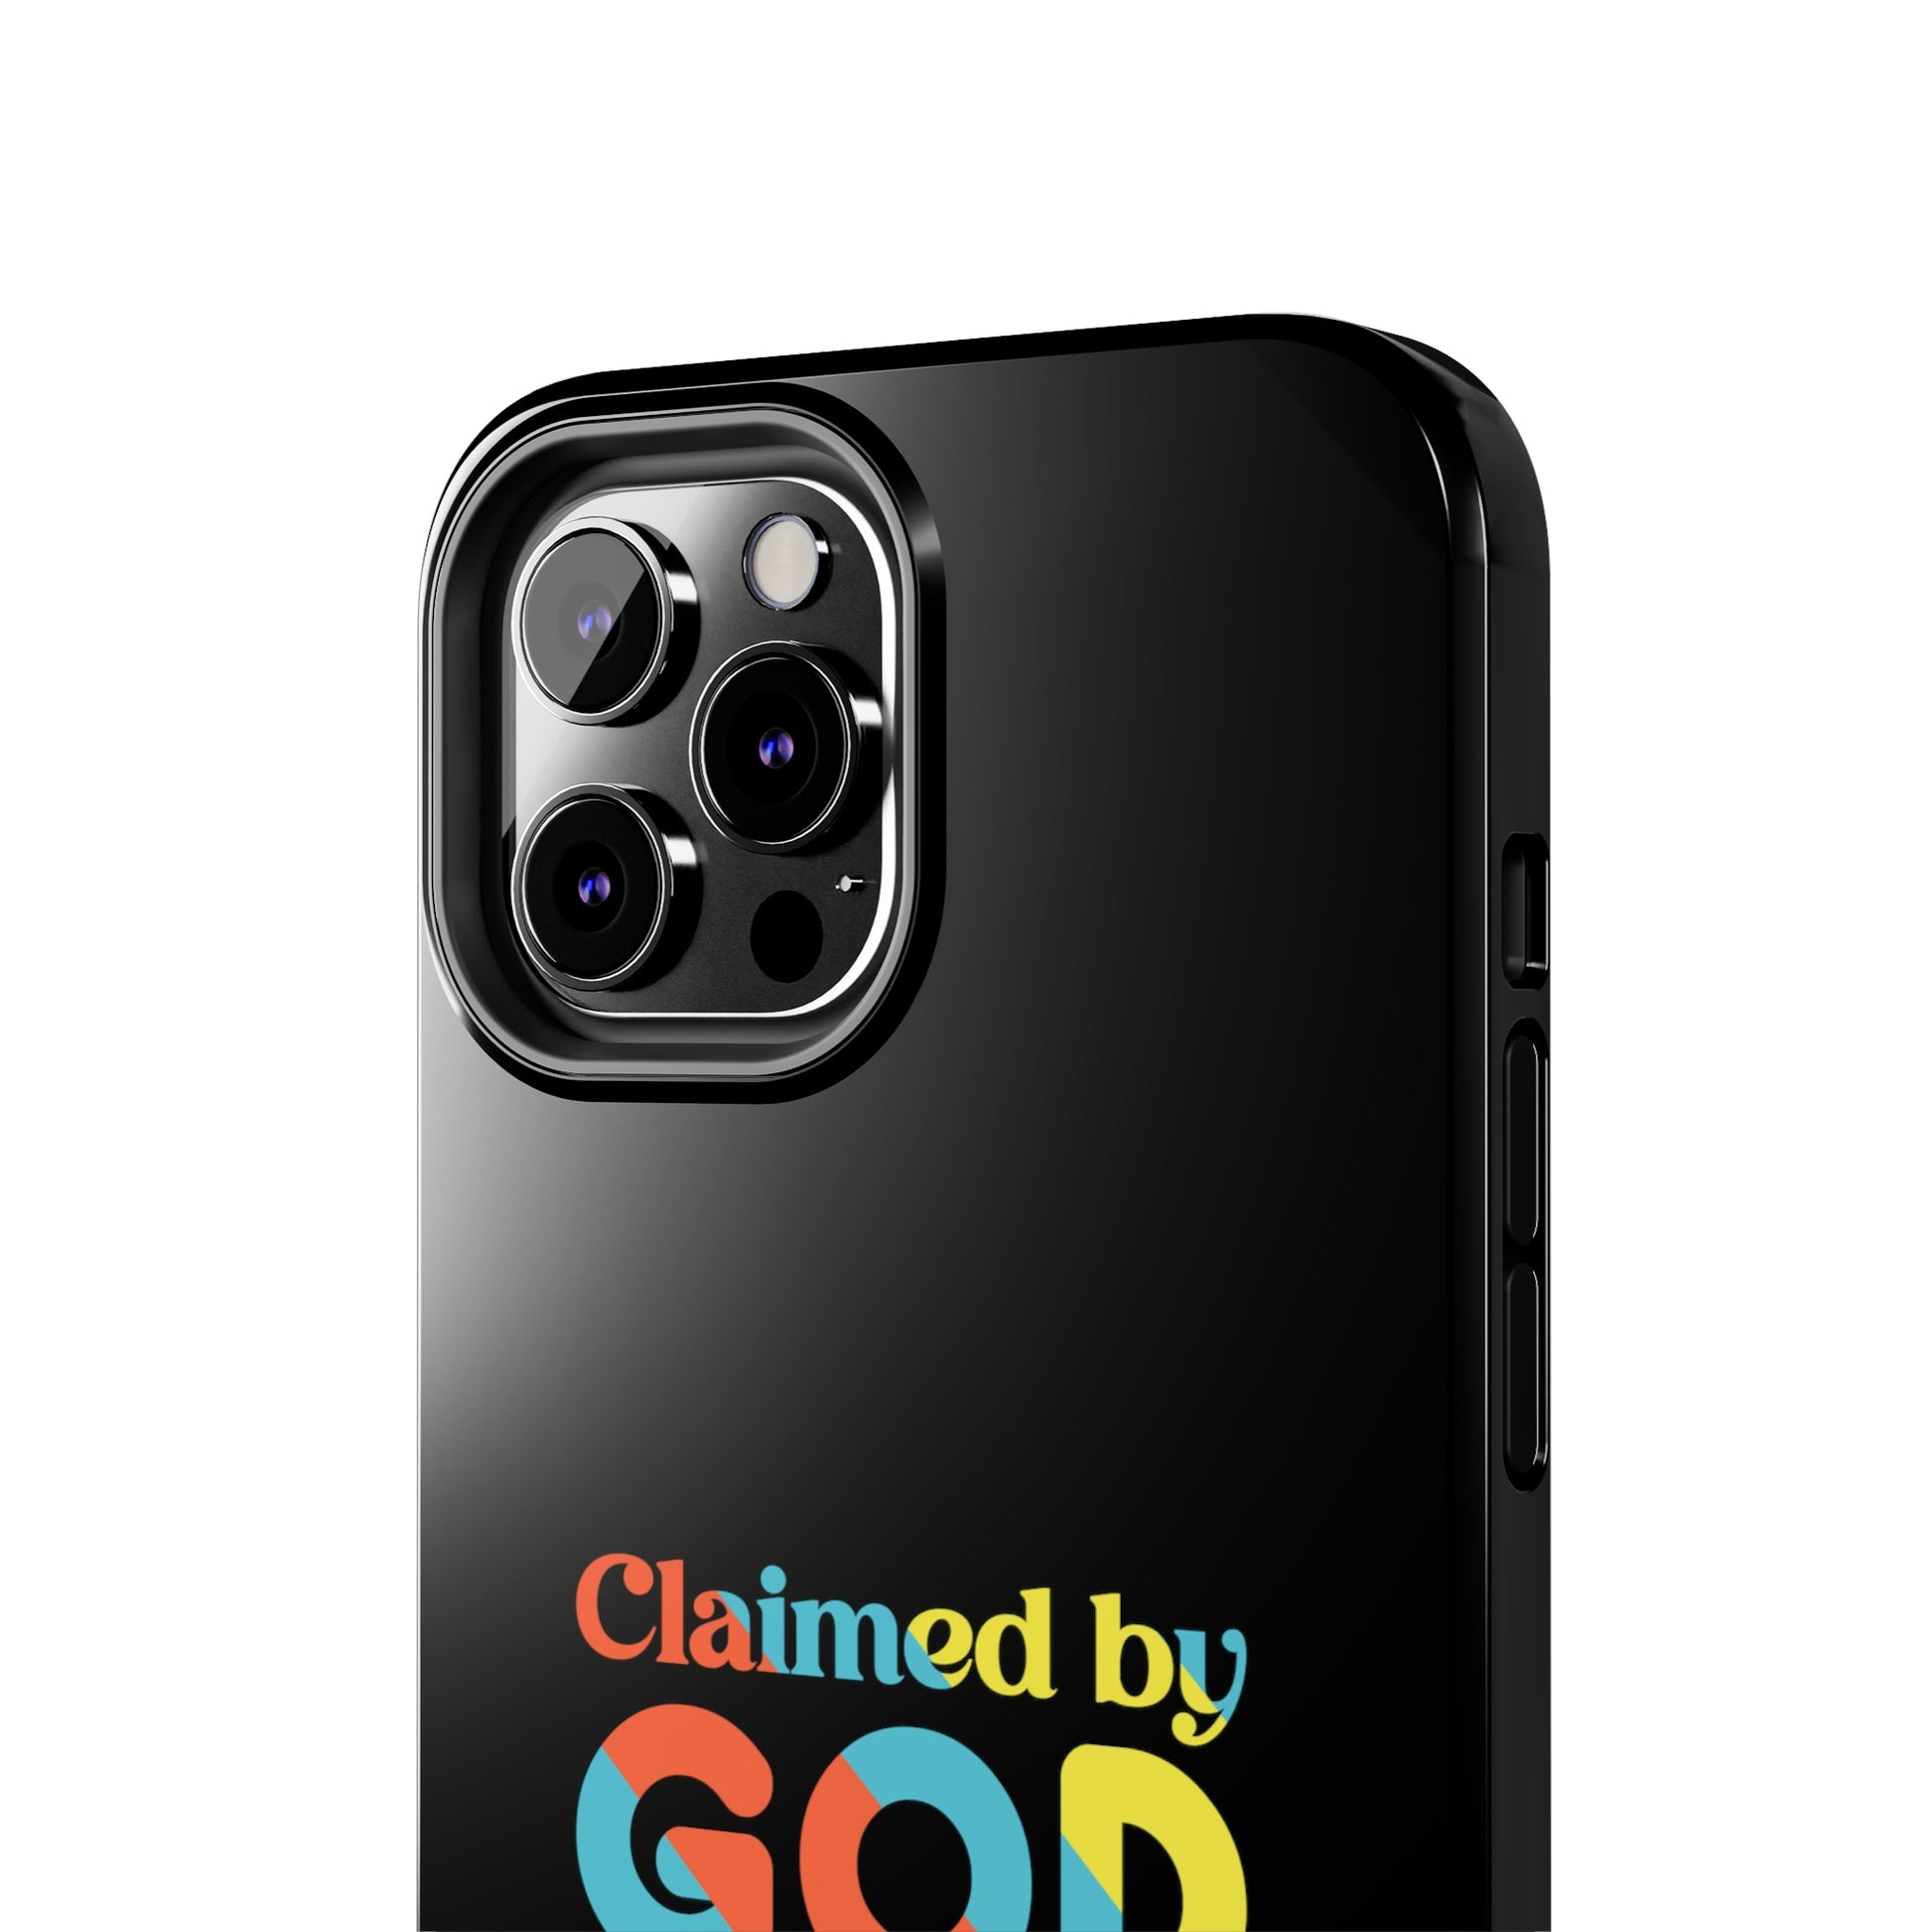 Claimed By God Purpose Over Pain Christian Phone Tough Phone Cases, Case-Mate Printify